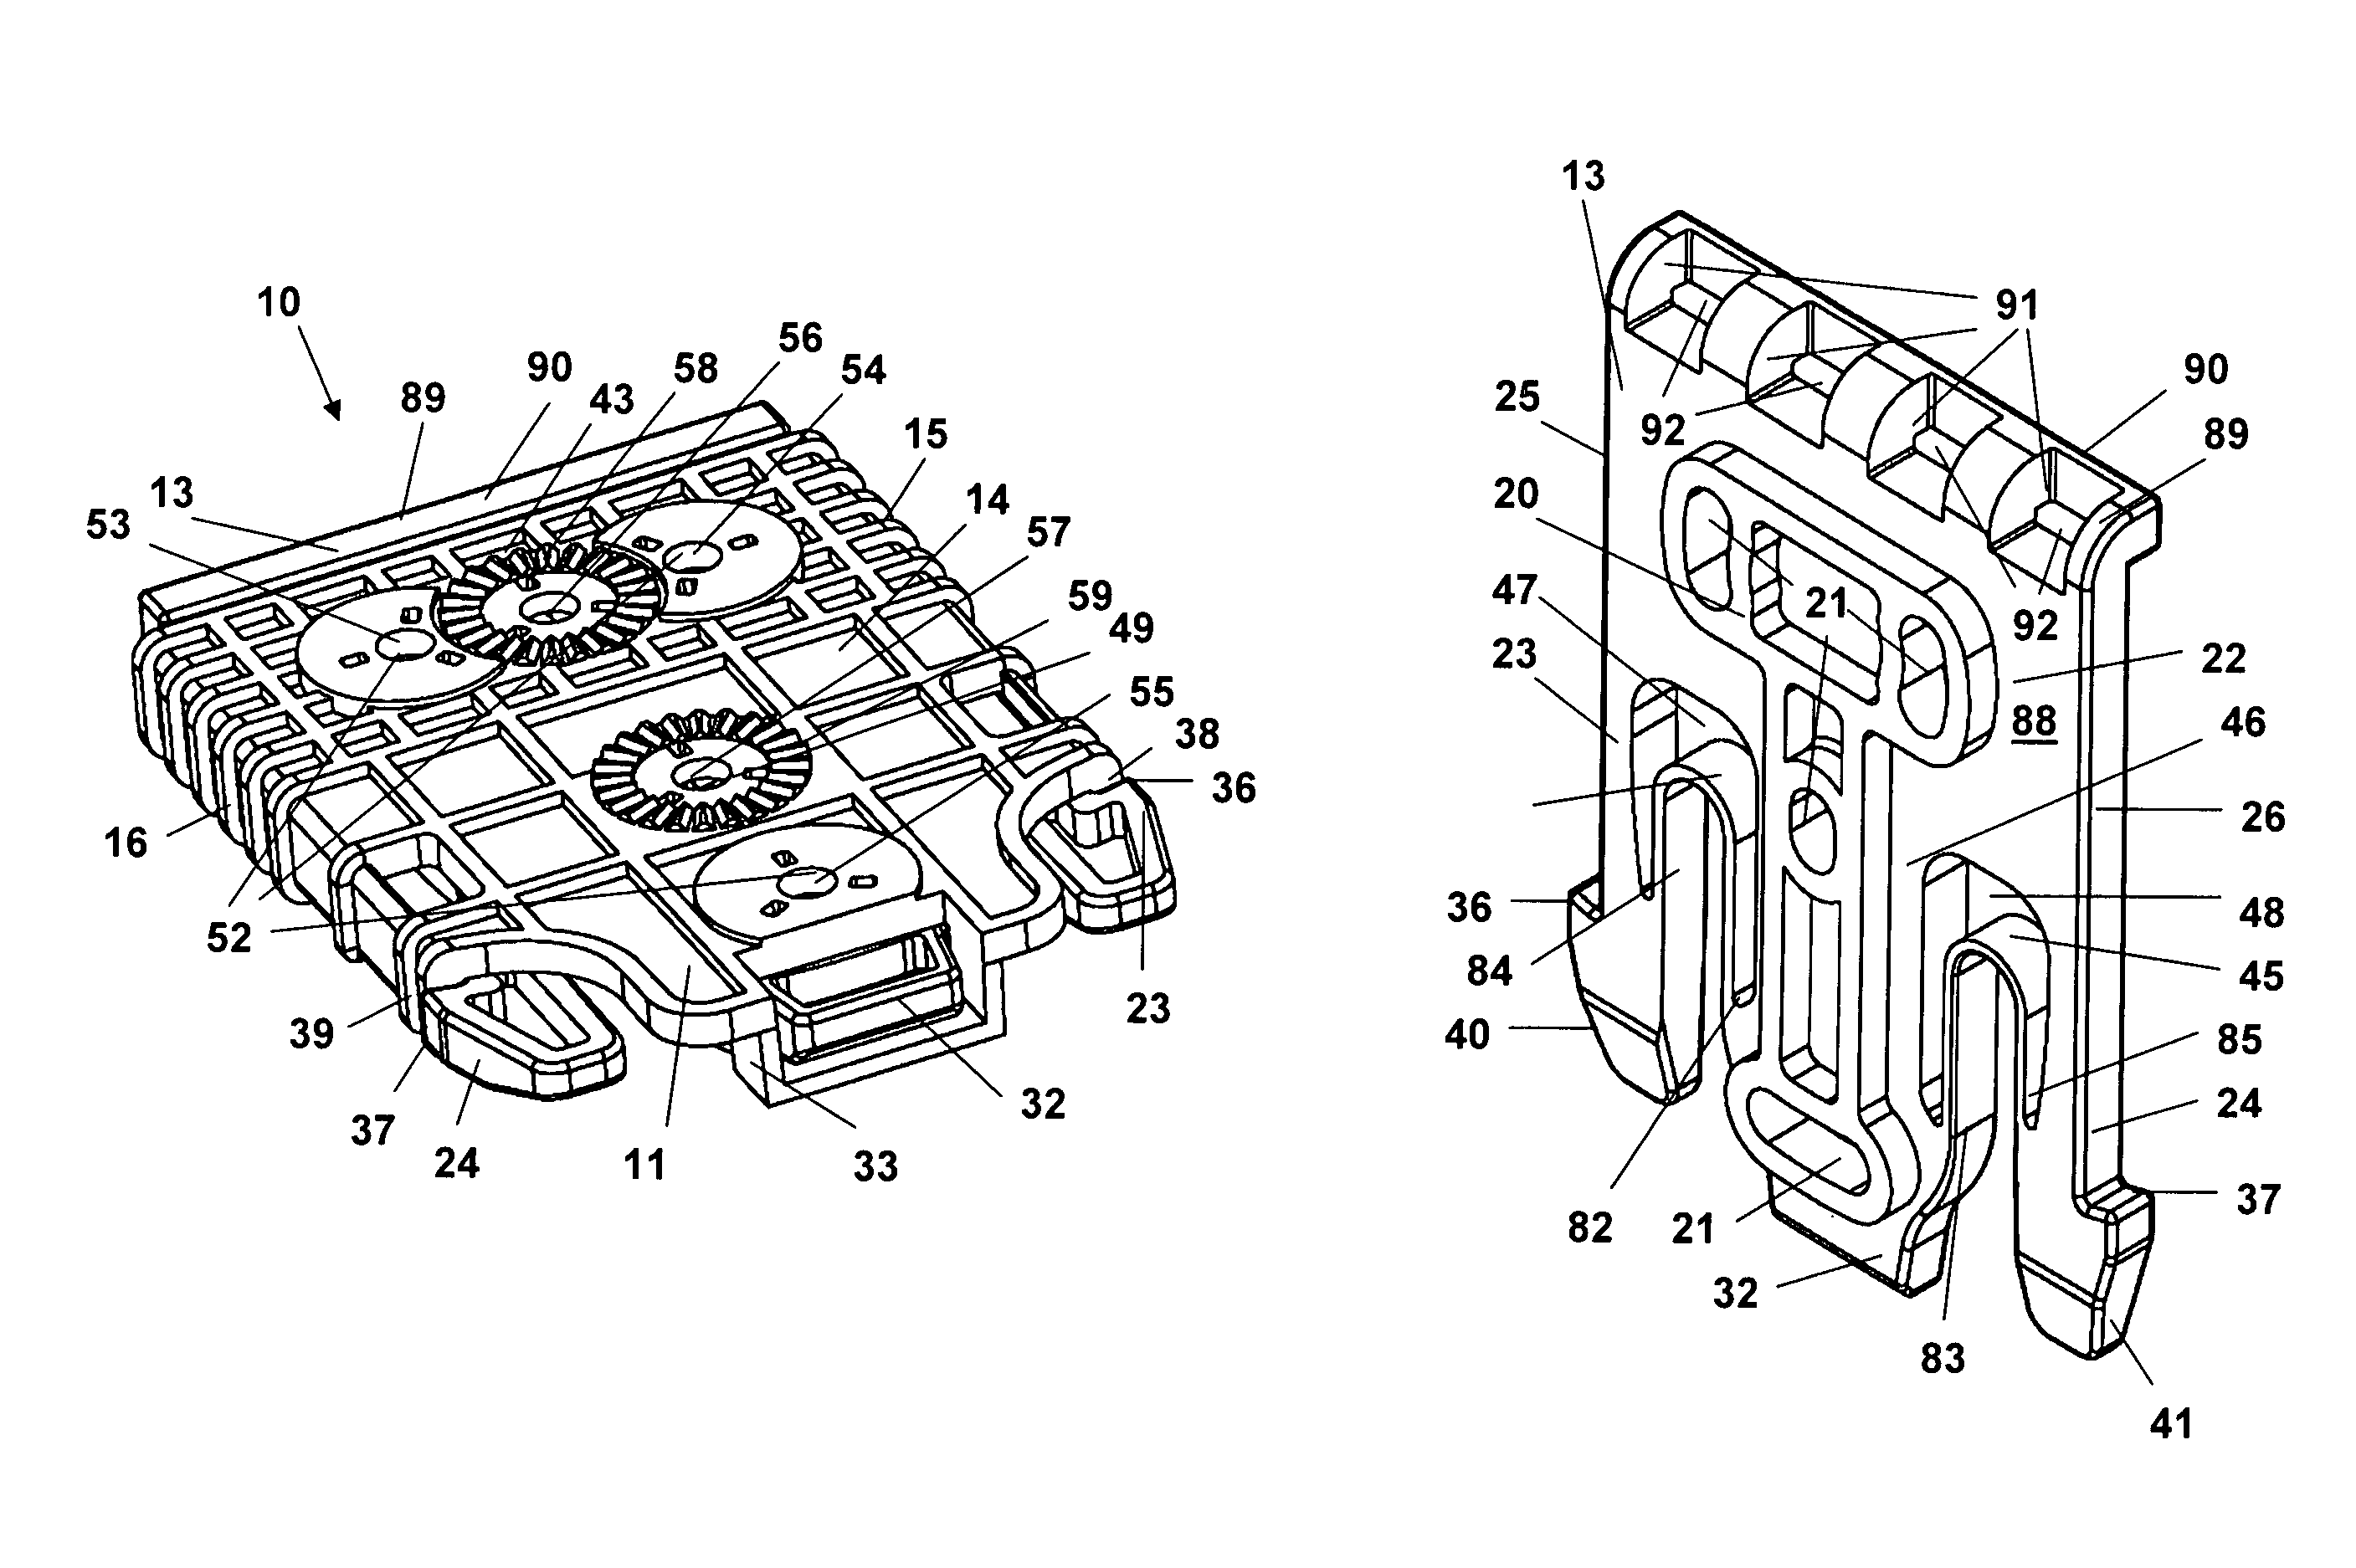 Attachment mount and receiver system for removably attaching articles to garments